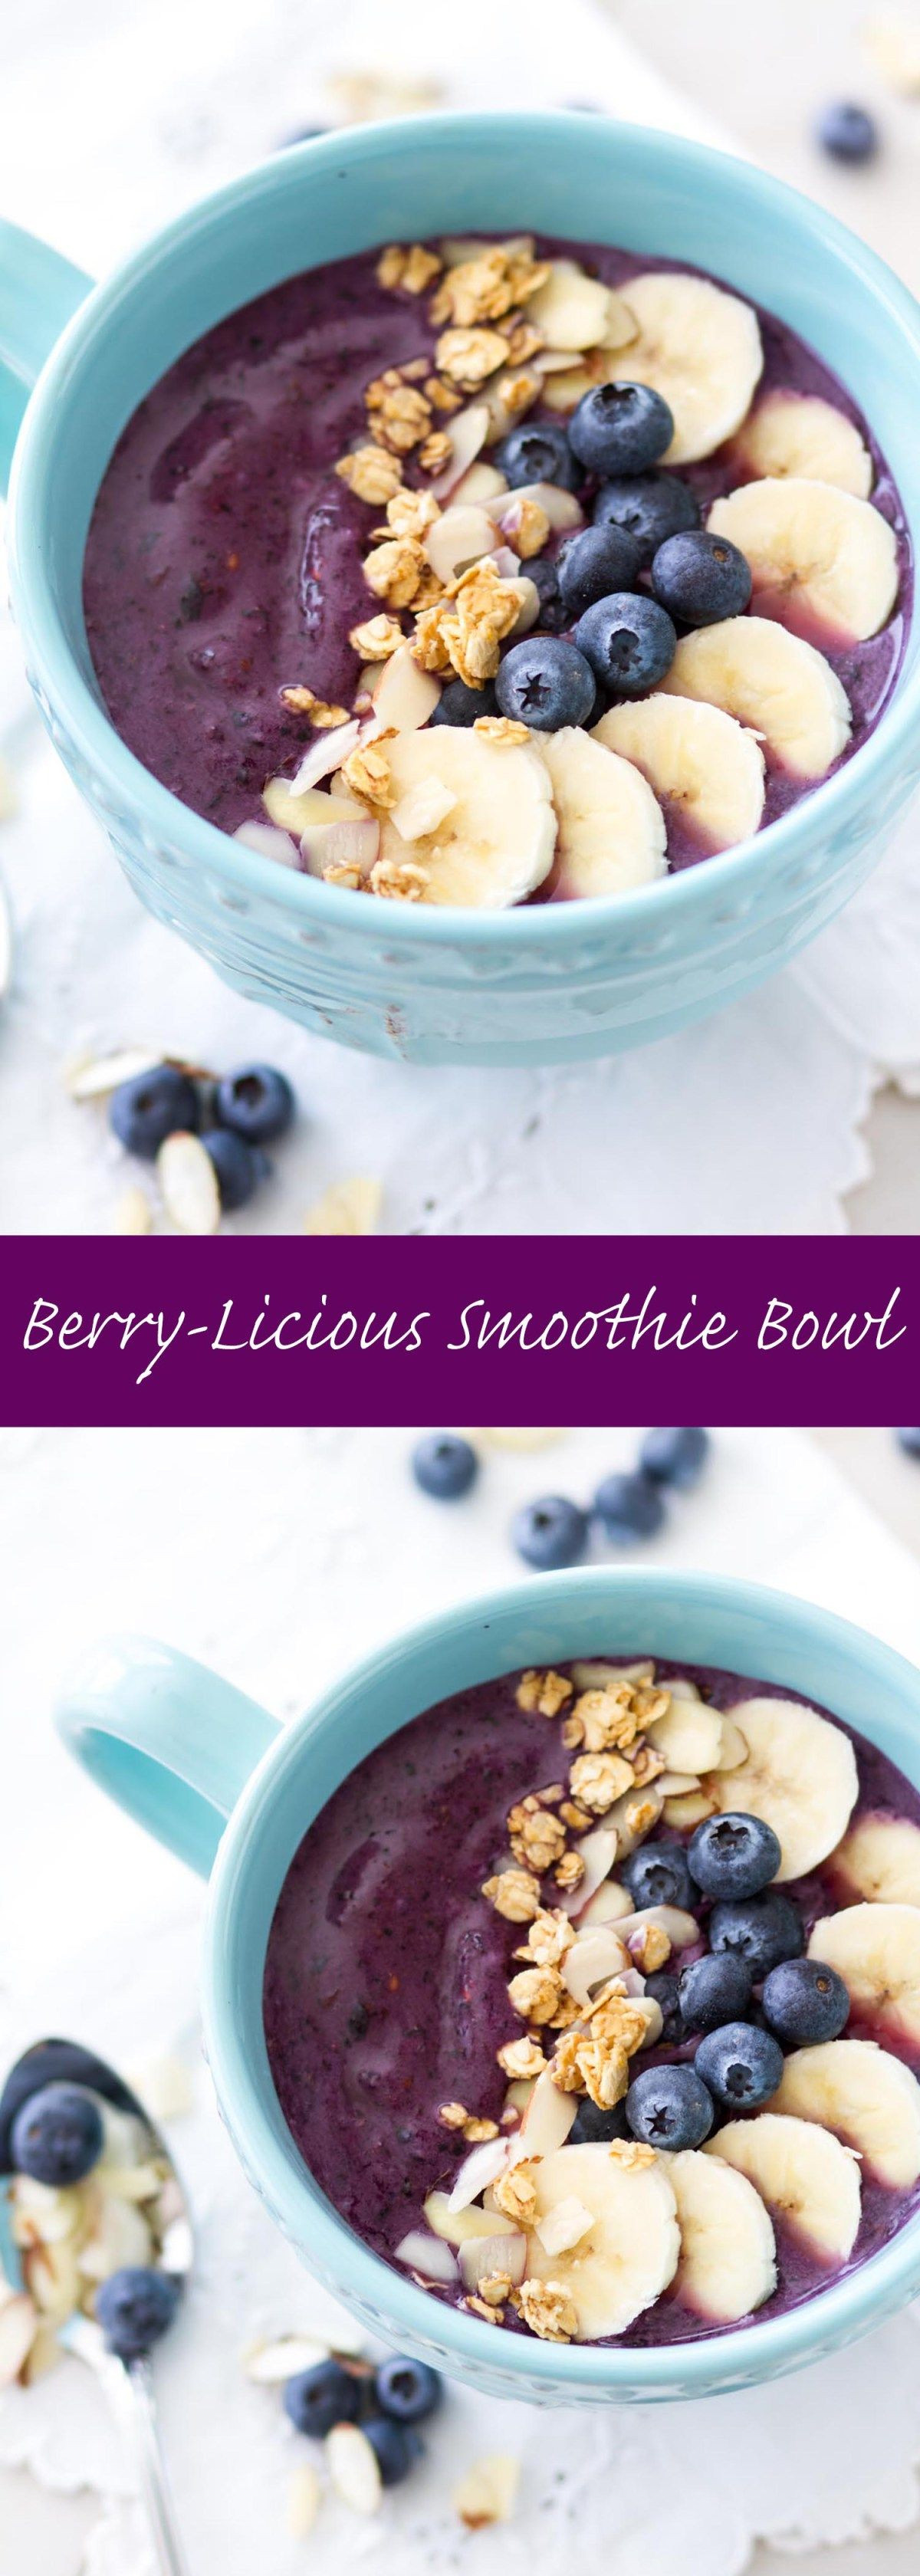 Healthy Smoothie Recipes With Yogurt
 This healthy smoothie bowl is made with mixed berries